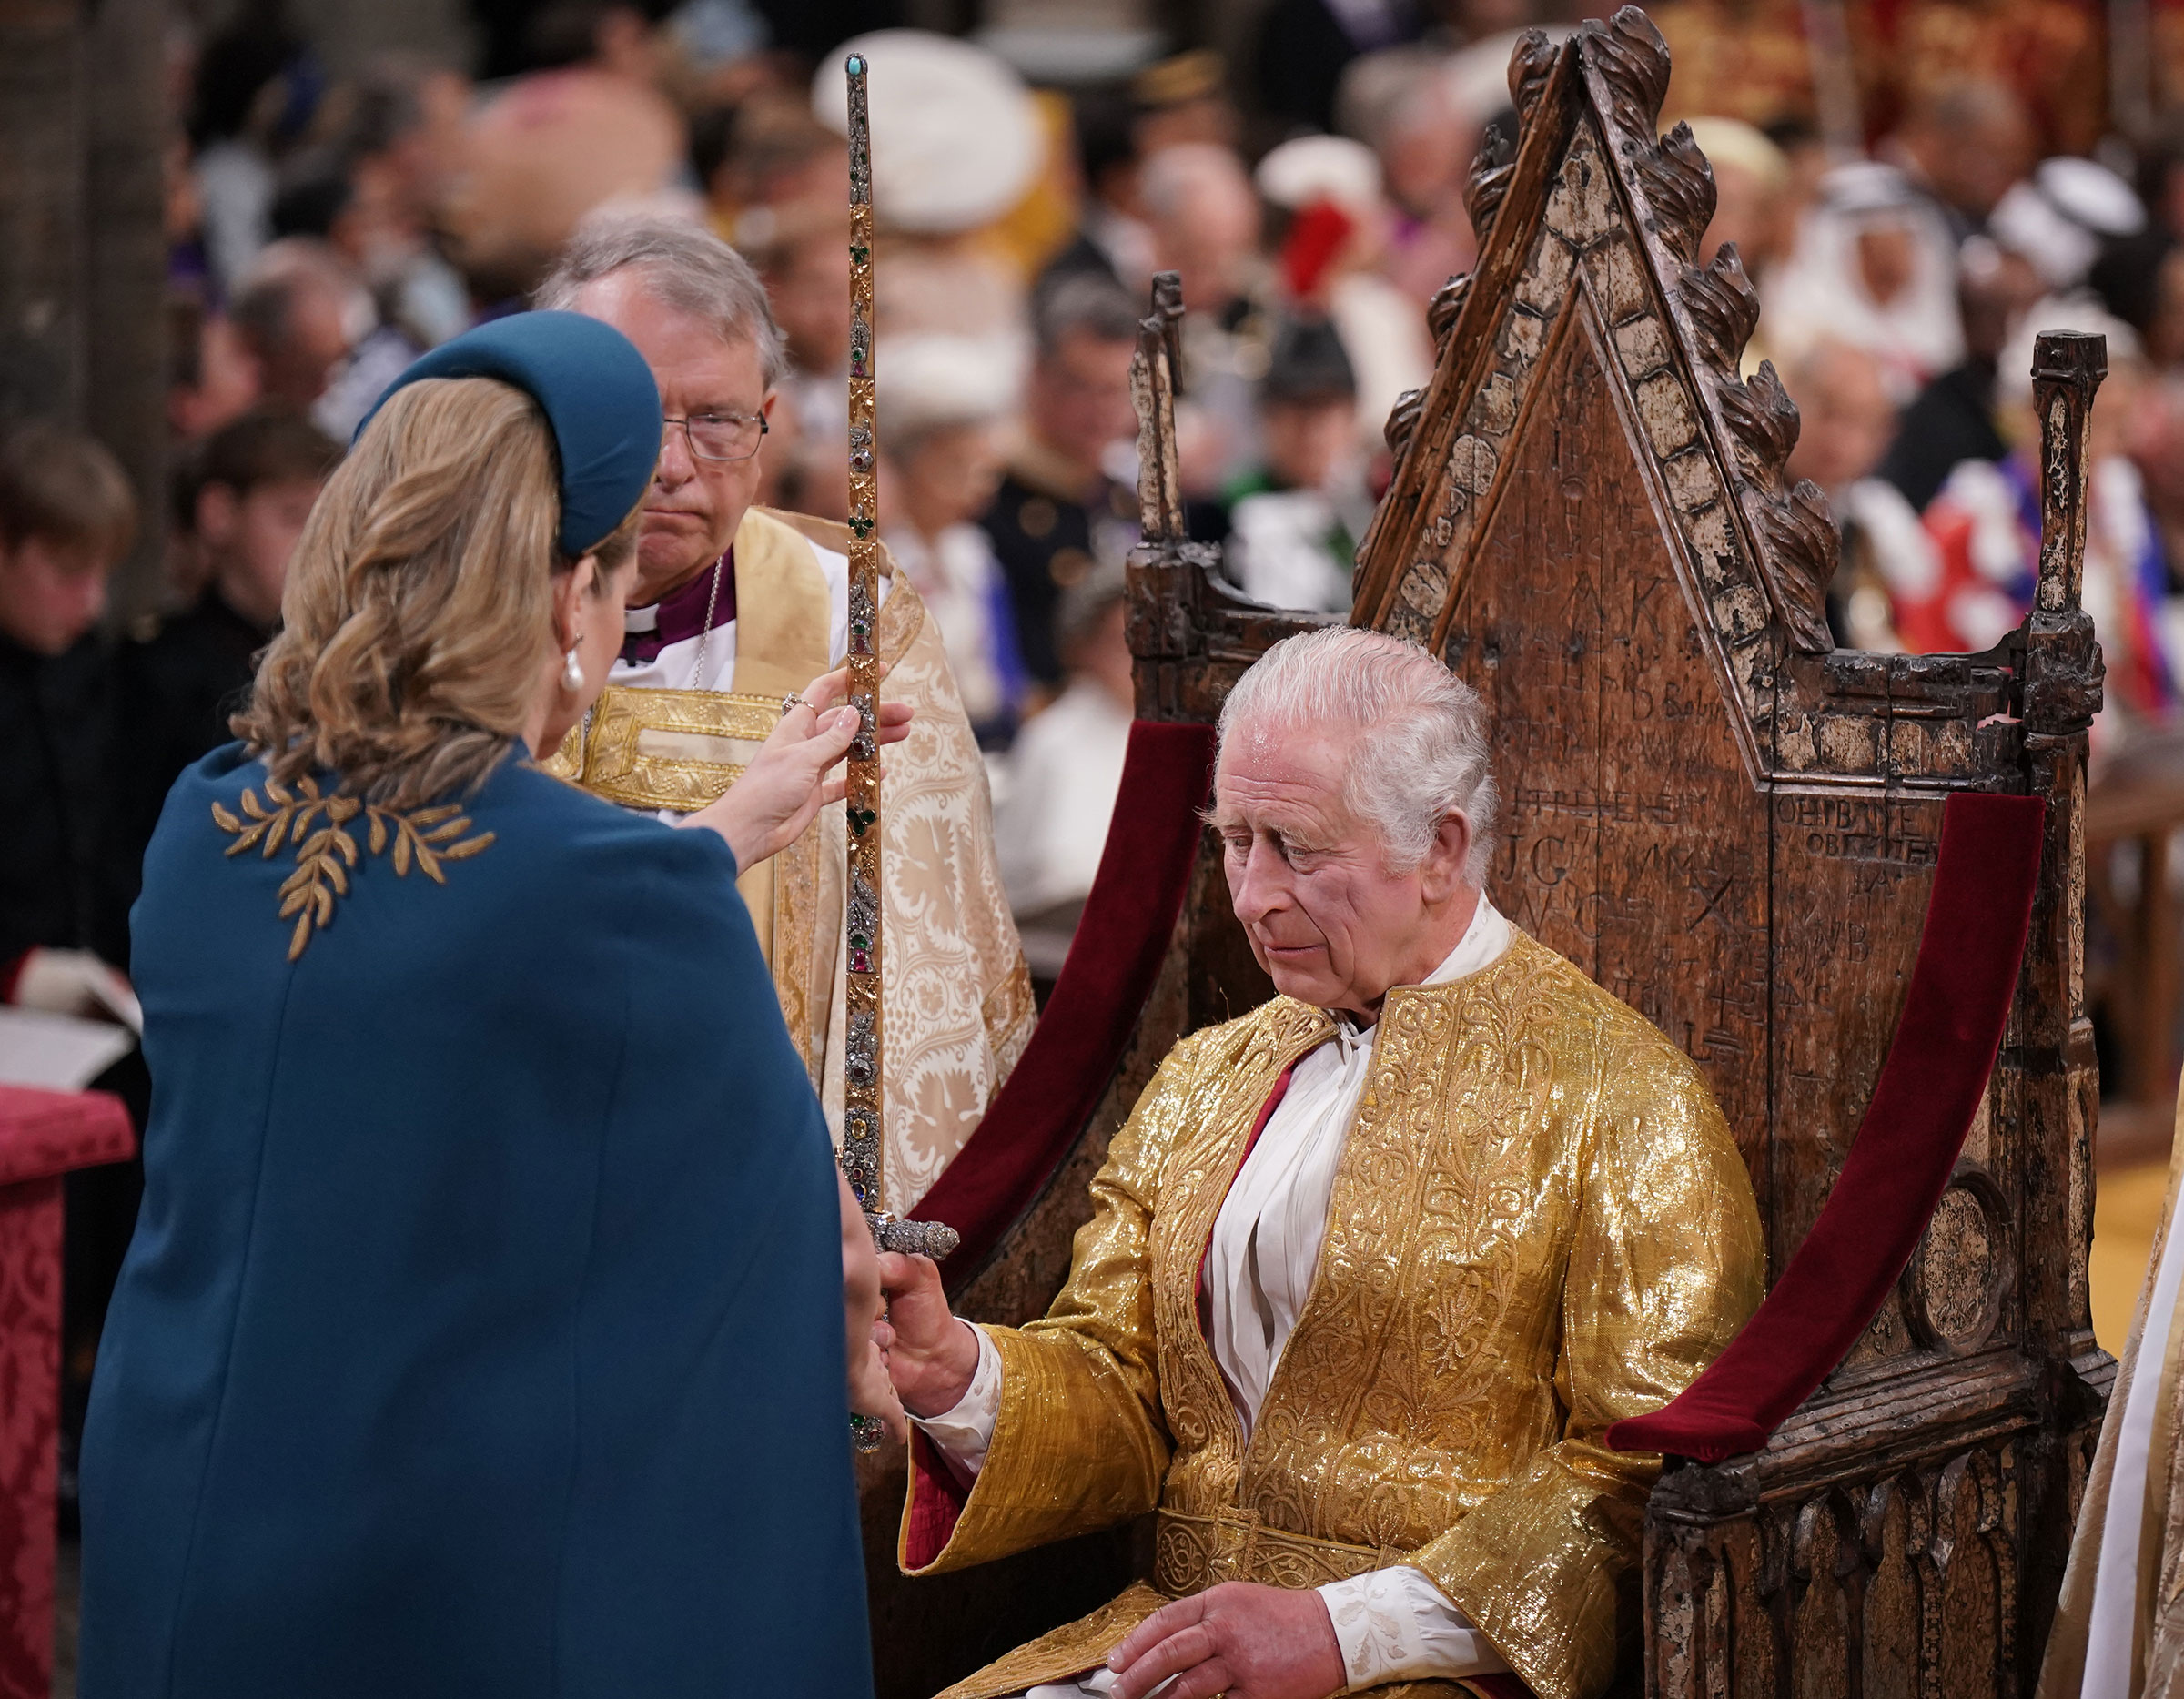 Lord President of the Council, Penny Mordaunt, presents the Sword of State to King Charles III during his coronation ceremony. (Victoria Jones—WPA Pool/Getty Images)